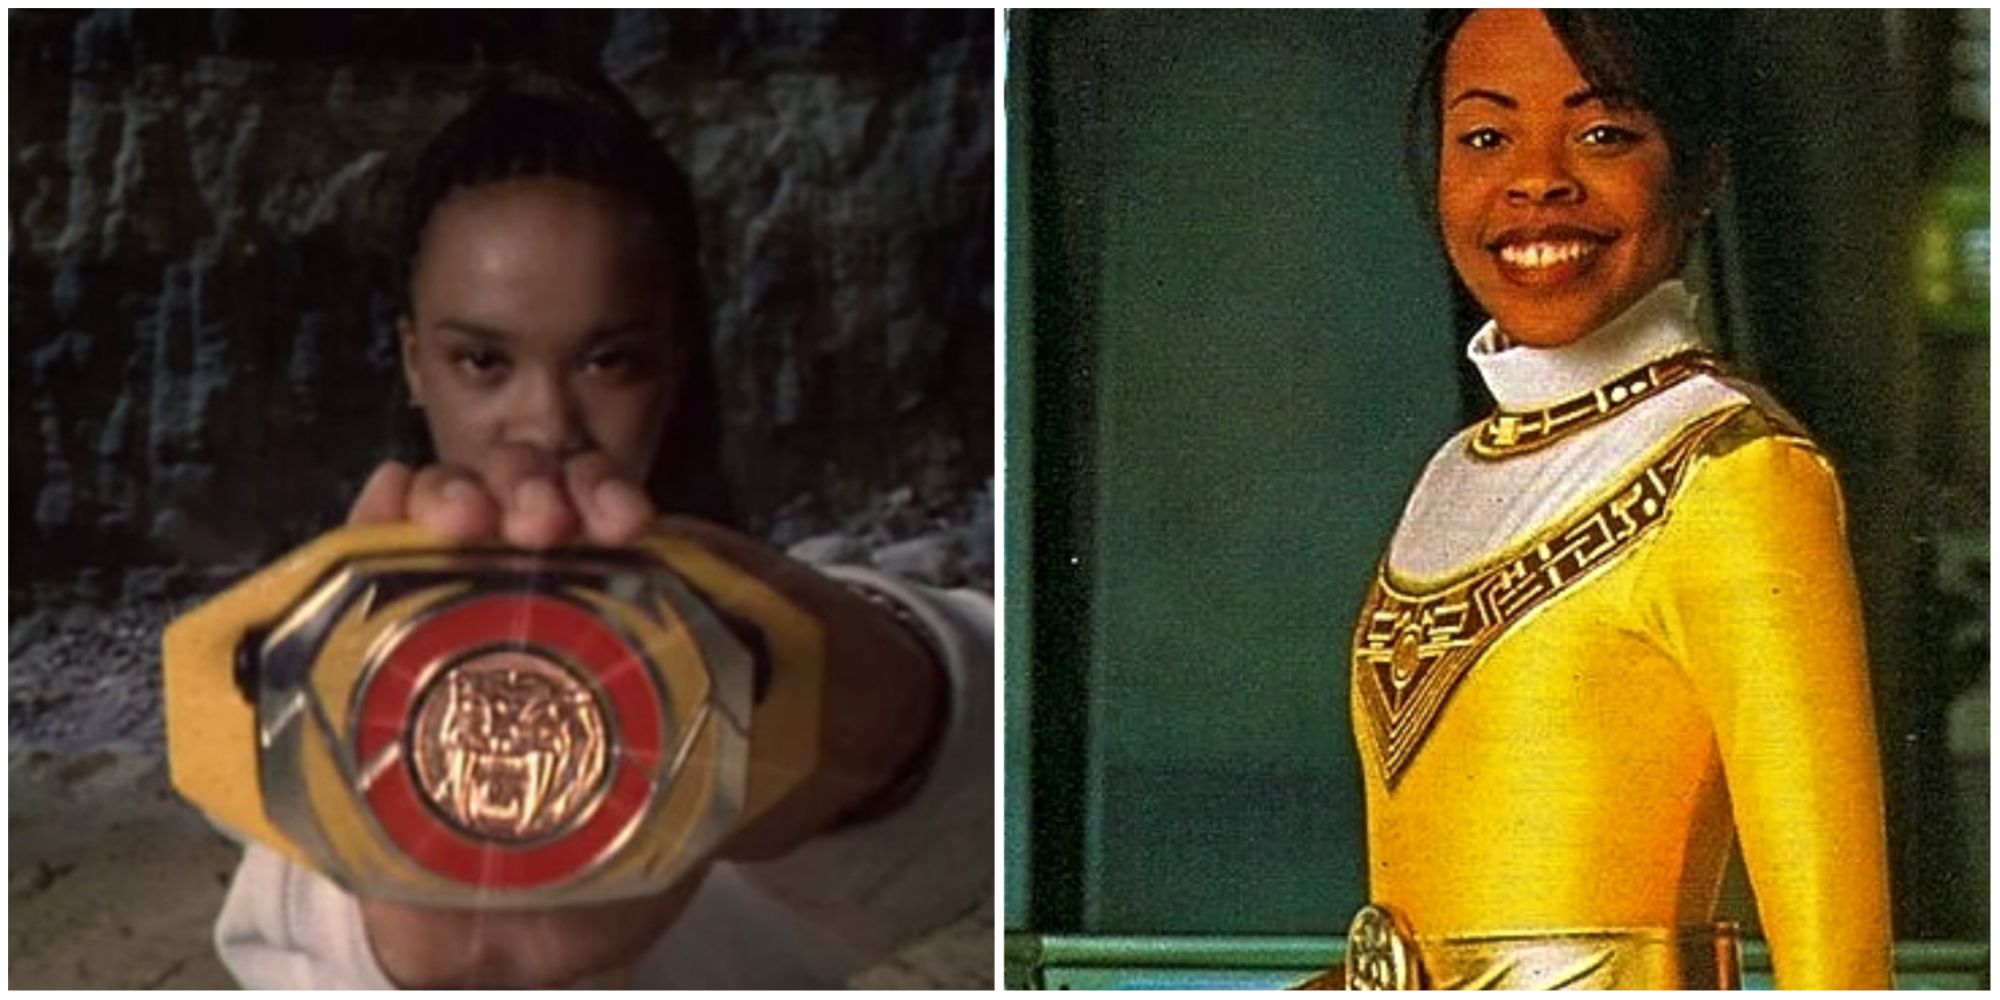 Aisha holding her Yellow morpher and Tanya smiling in the Yellow Zeo uniform